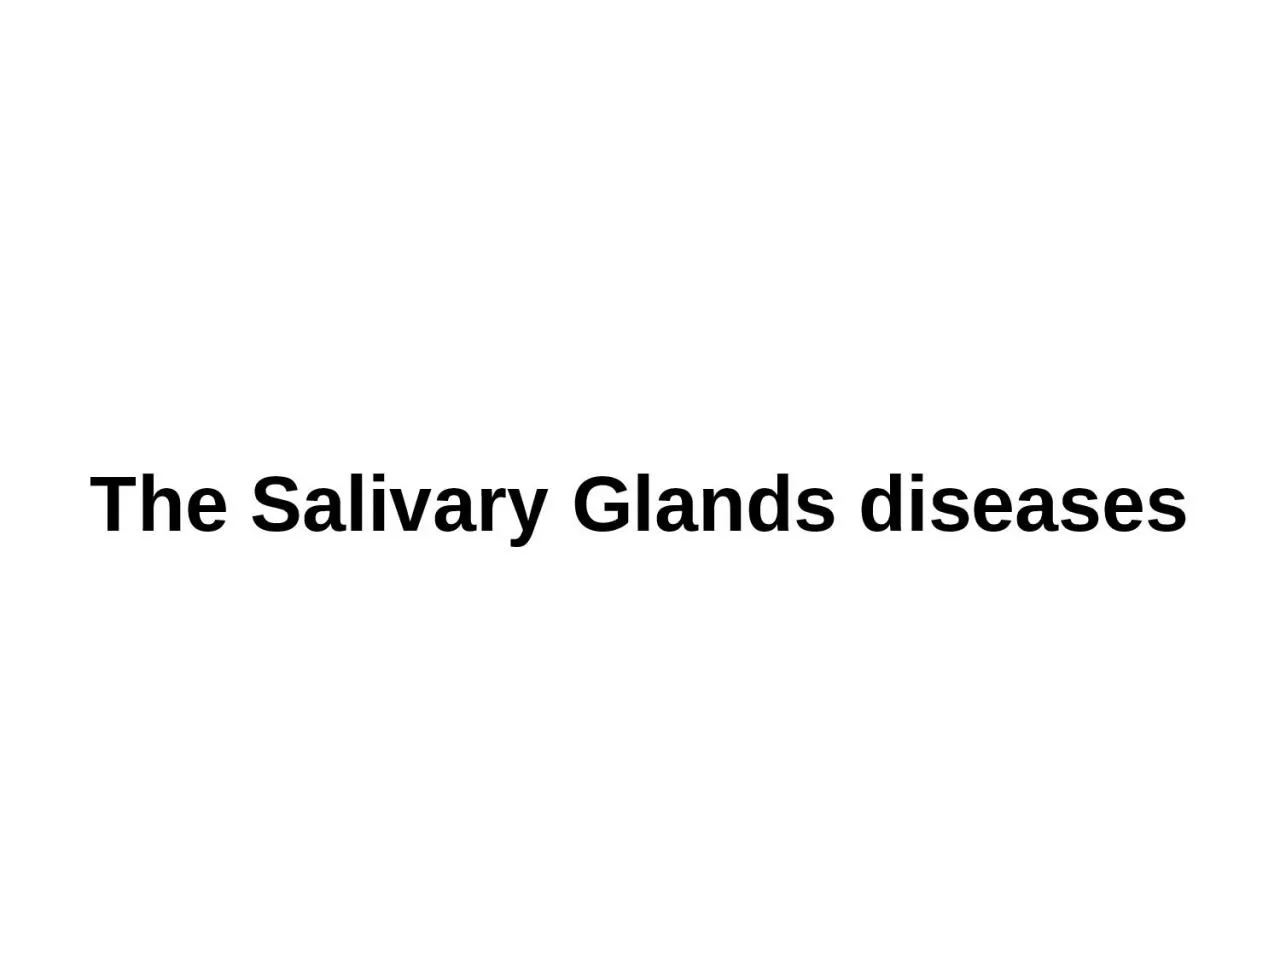 The Salivary Glands diseases